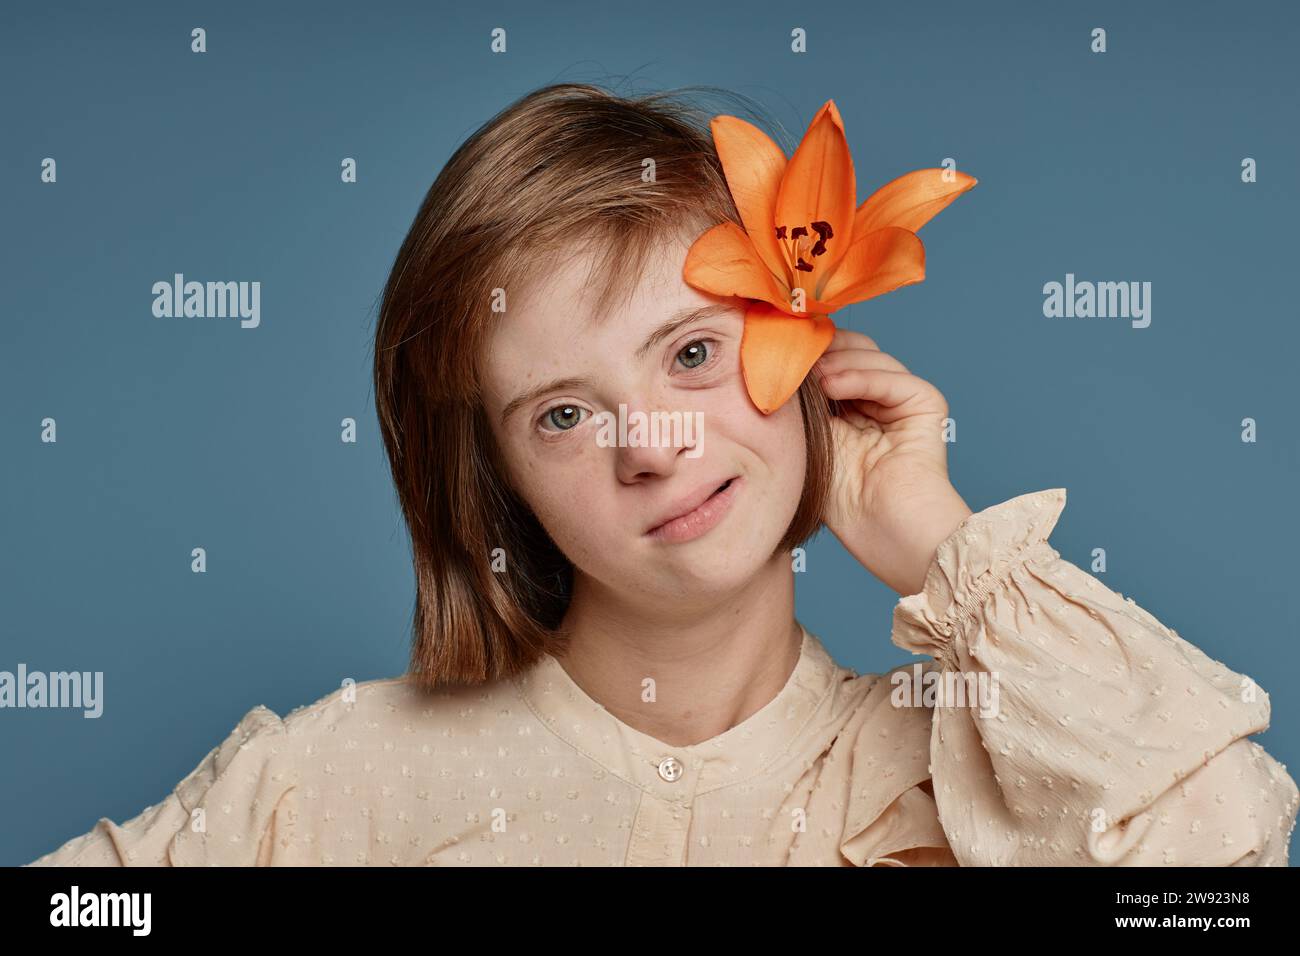 Girl with disability holding orange orchid behind ear against blue background Stock Photo